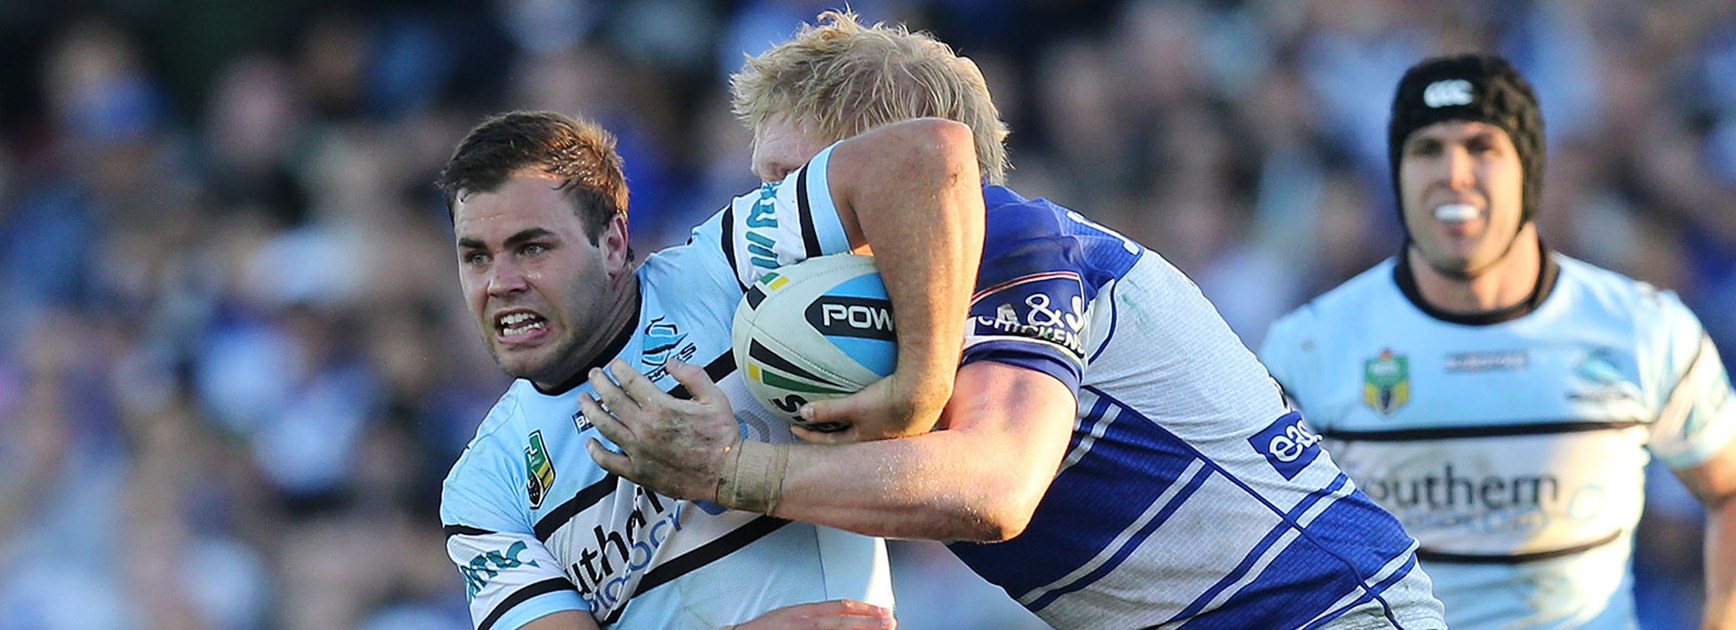 Cronulla's Wade Graham is tackled by Canterbury's James Graham in Round 20 at Belmore Sports Ground.